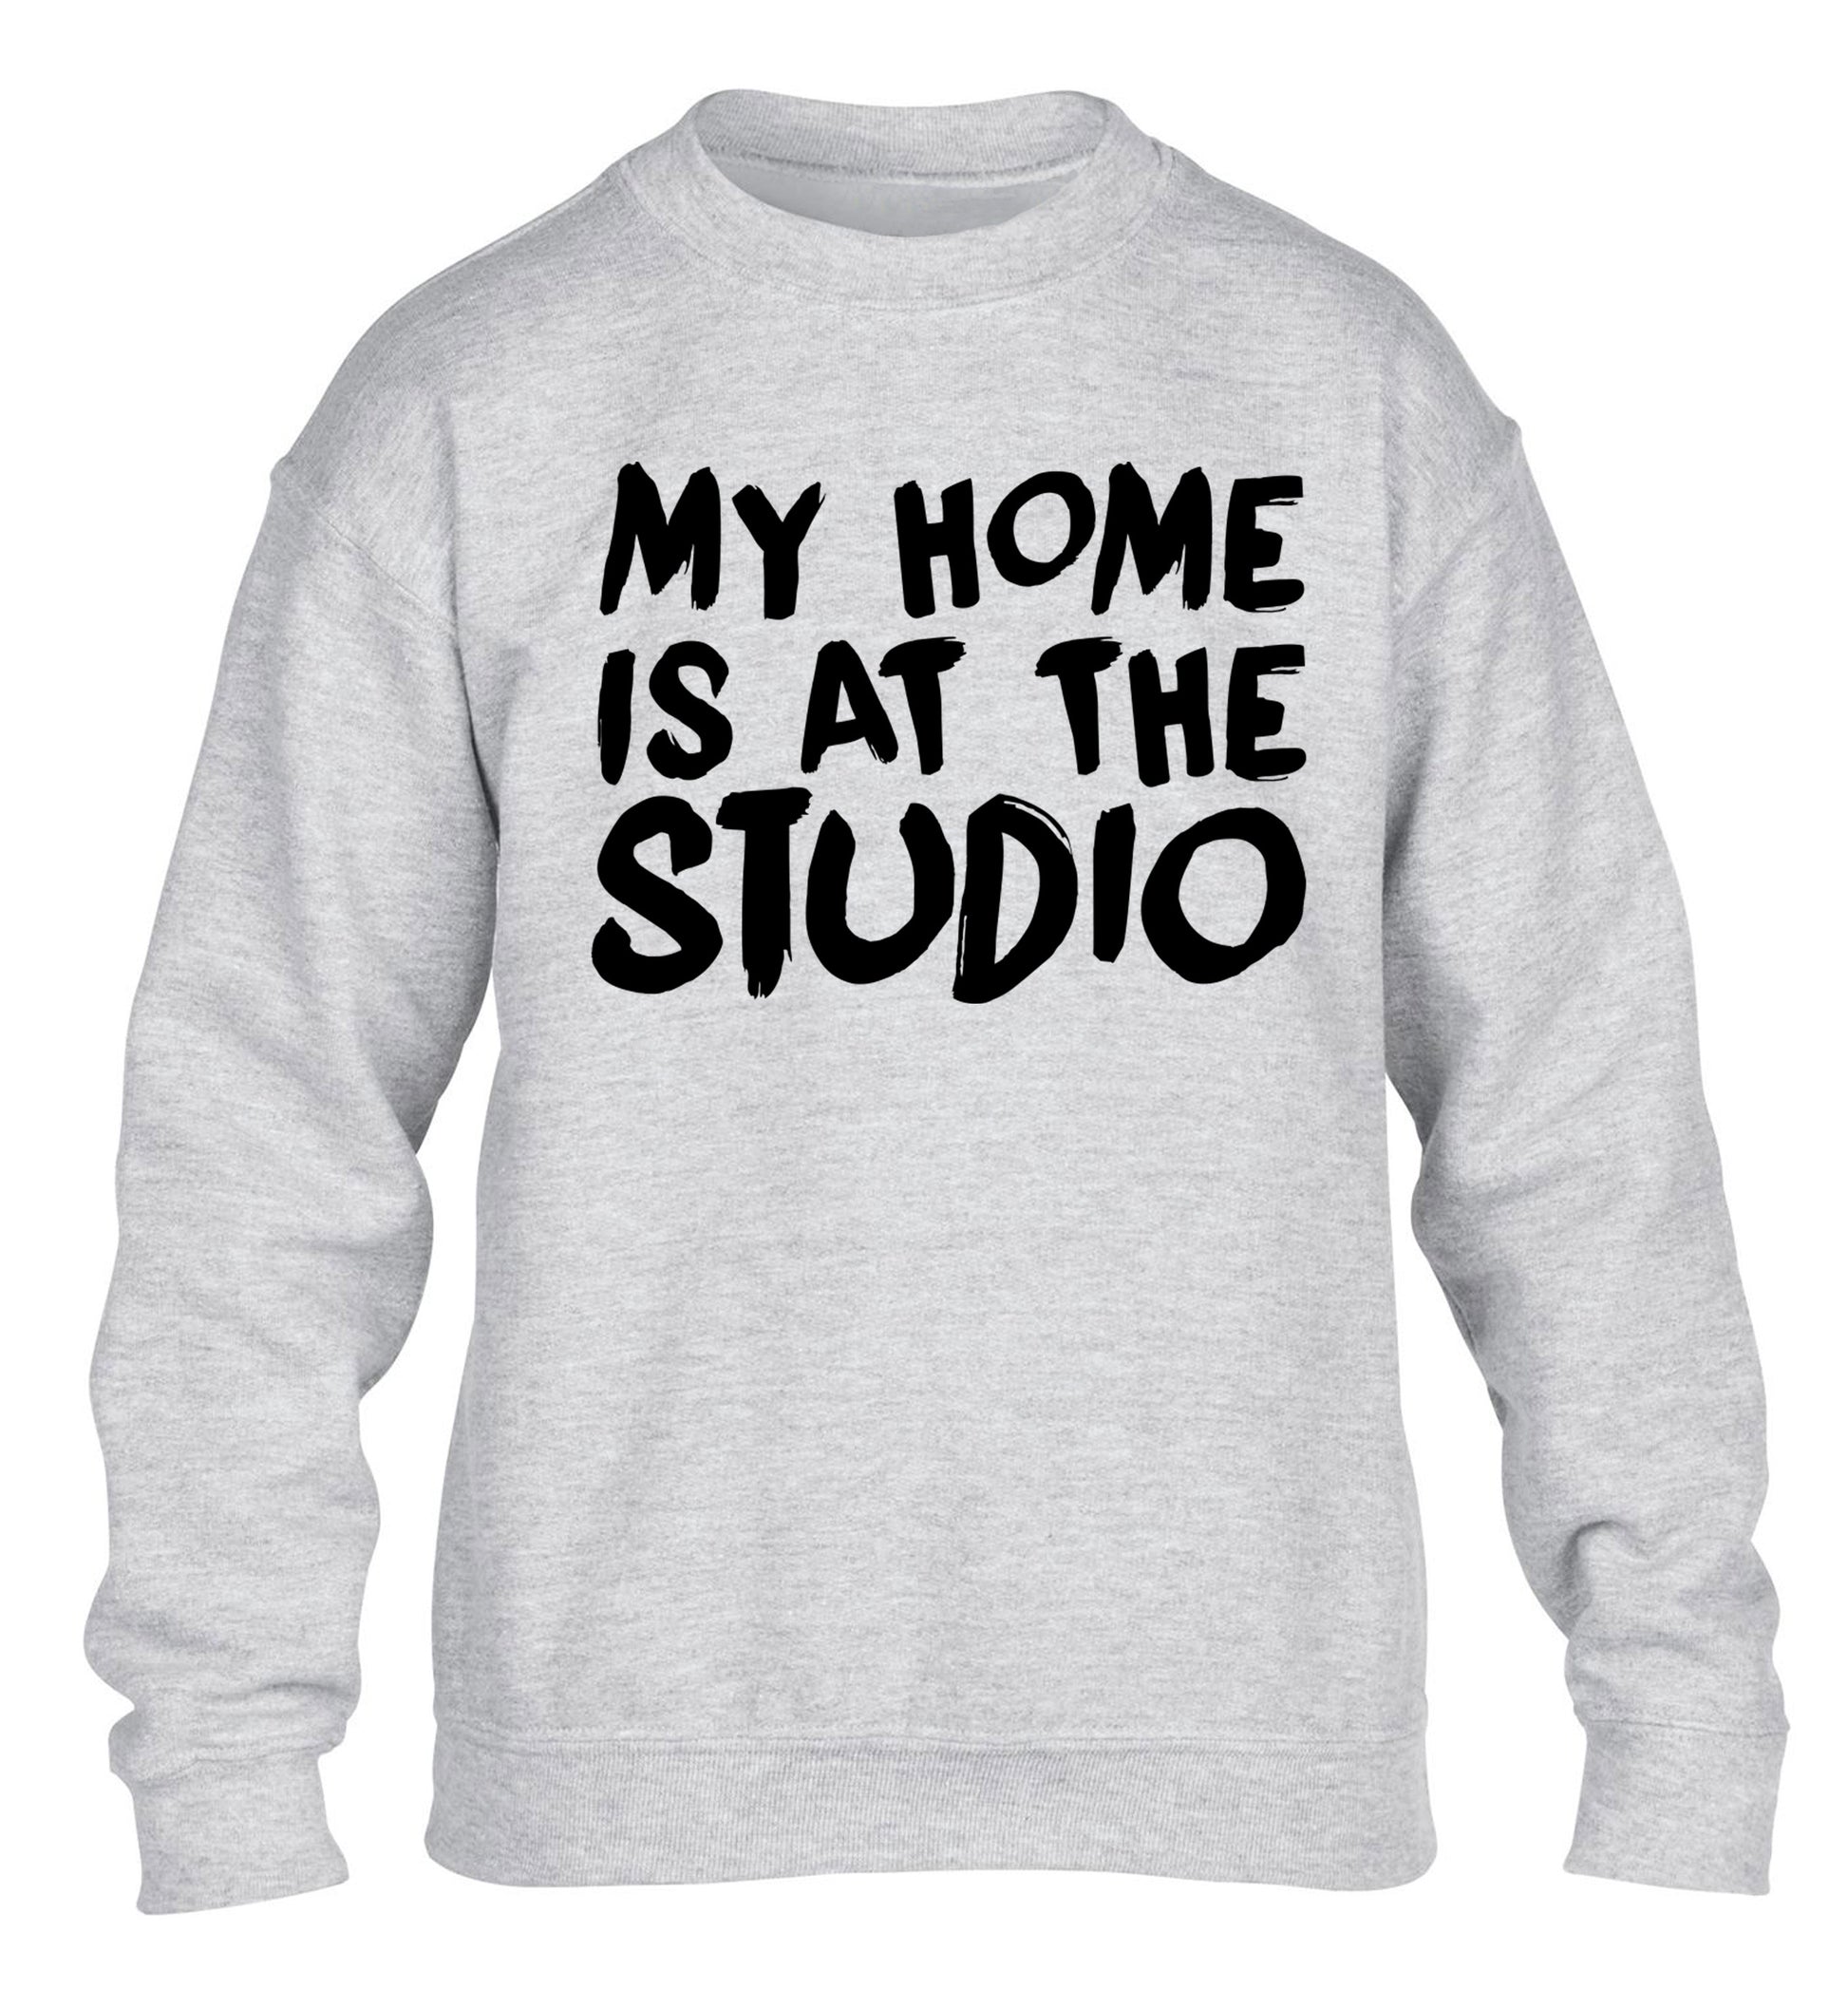 My home is at the studio children's grey sweater 12-14 Years